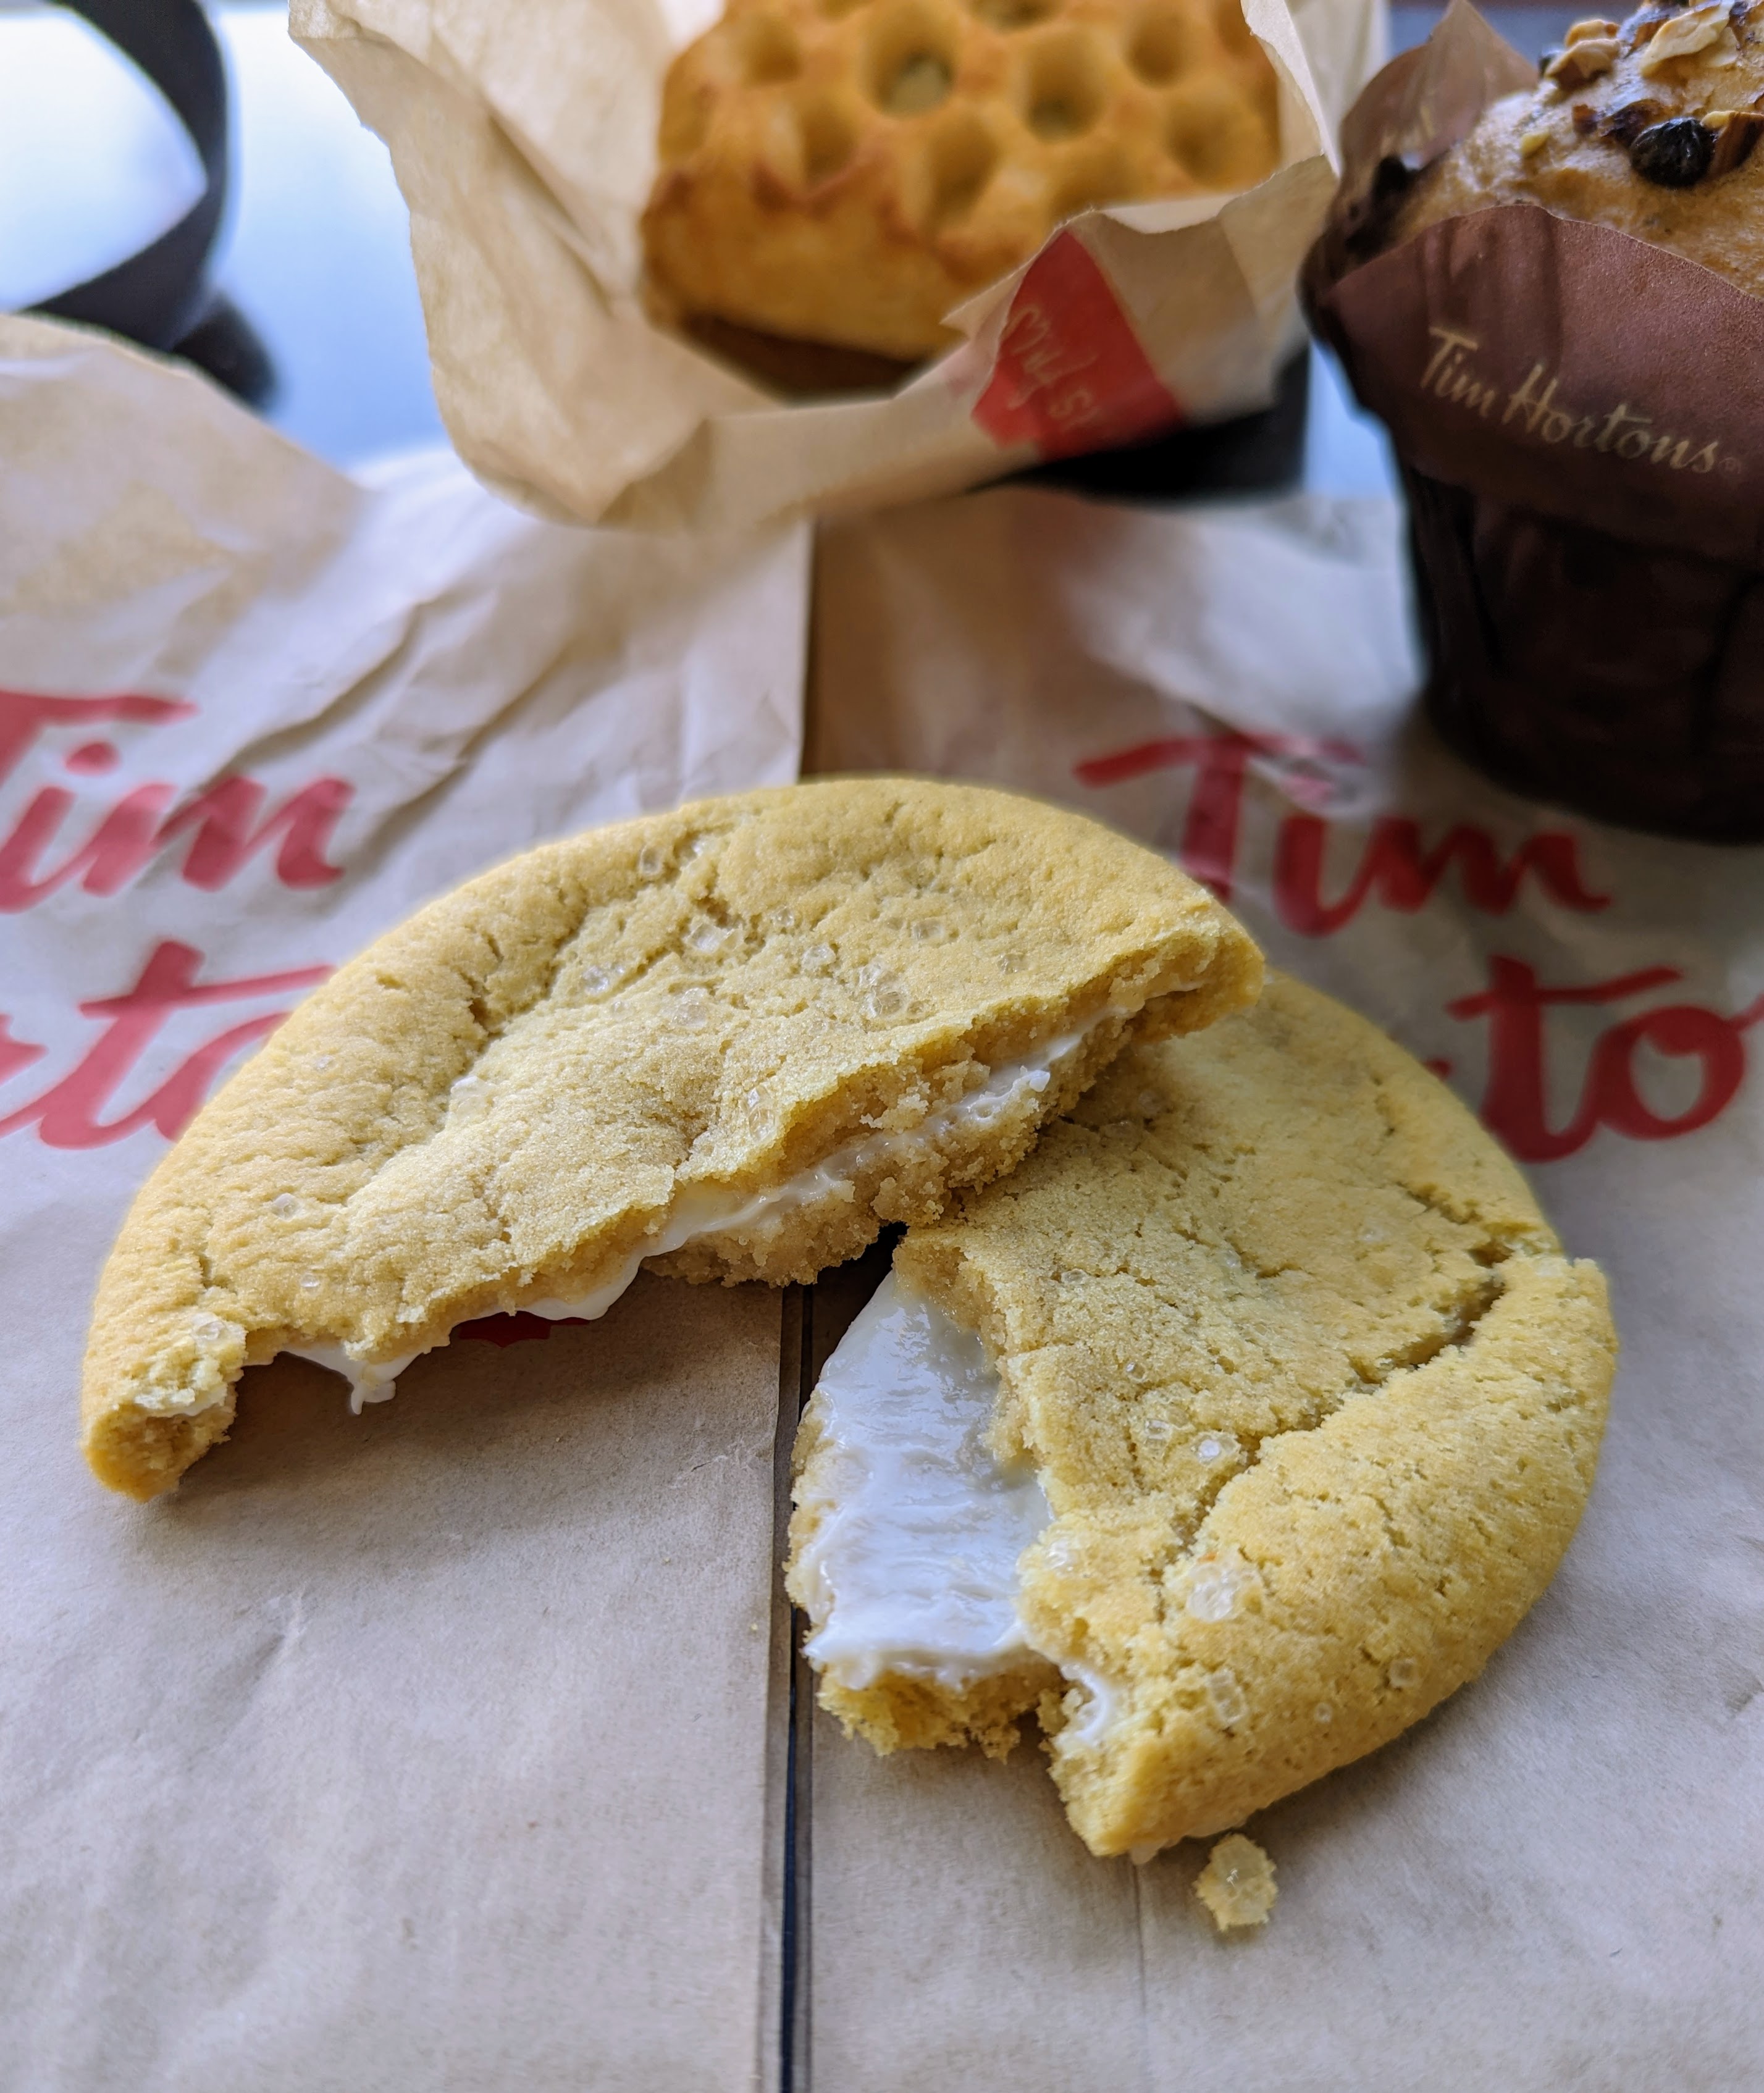 Smooch Food. There's so much to eat!: Filled Sugar Cookie Tim